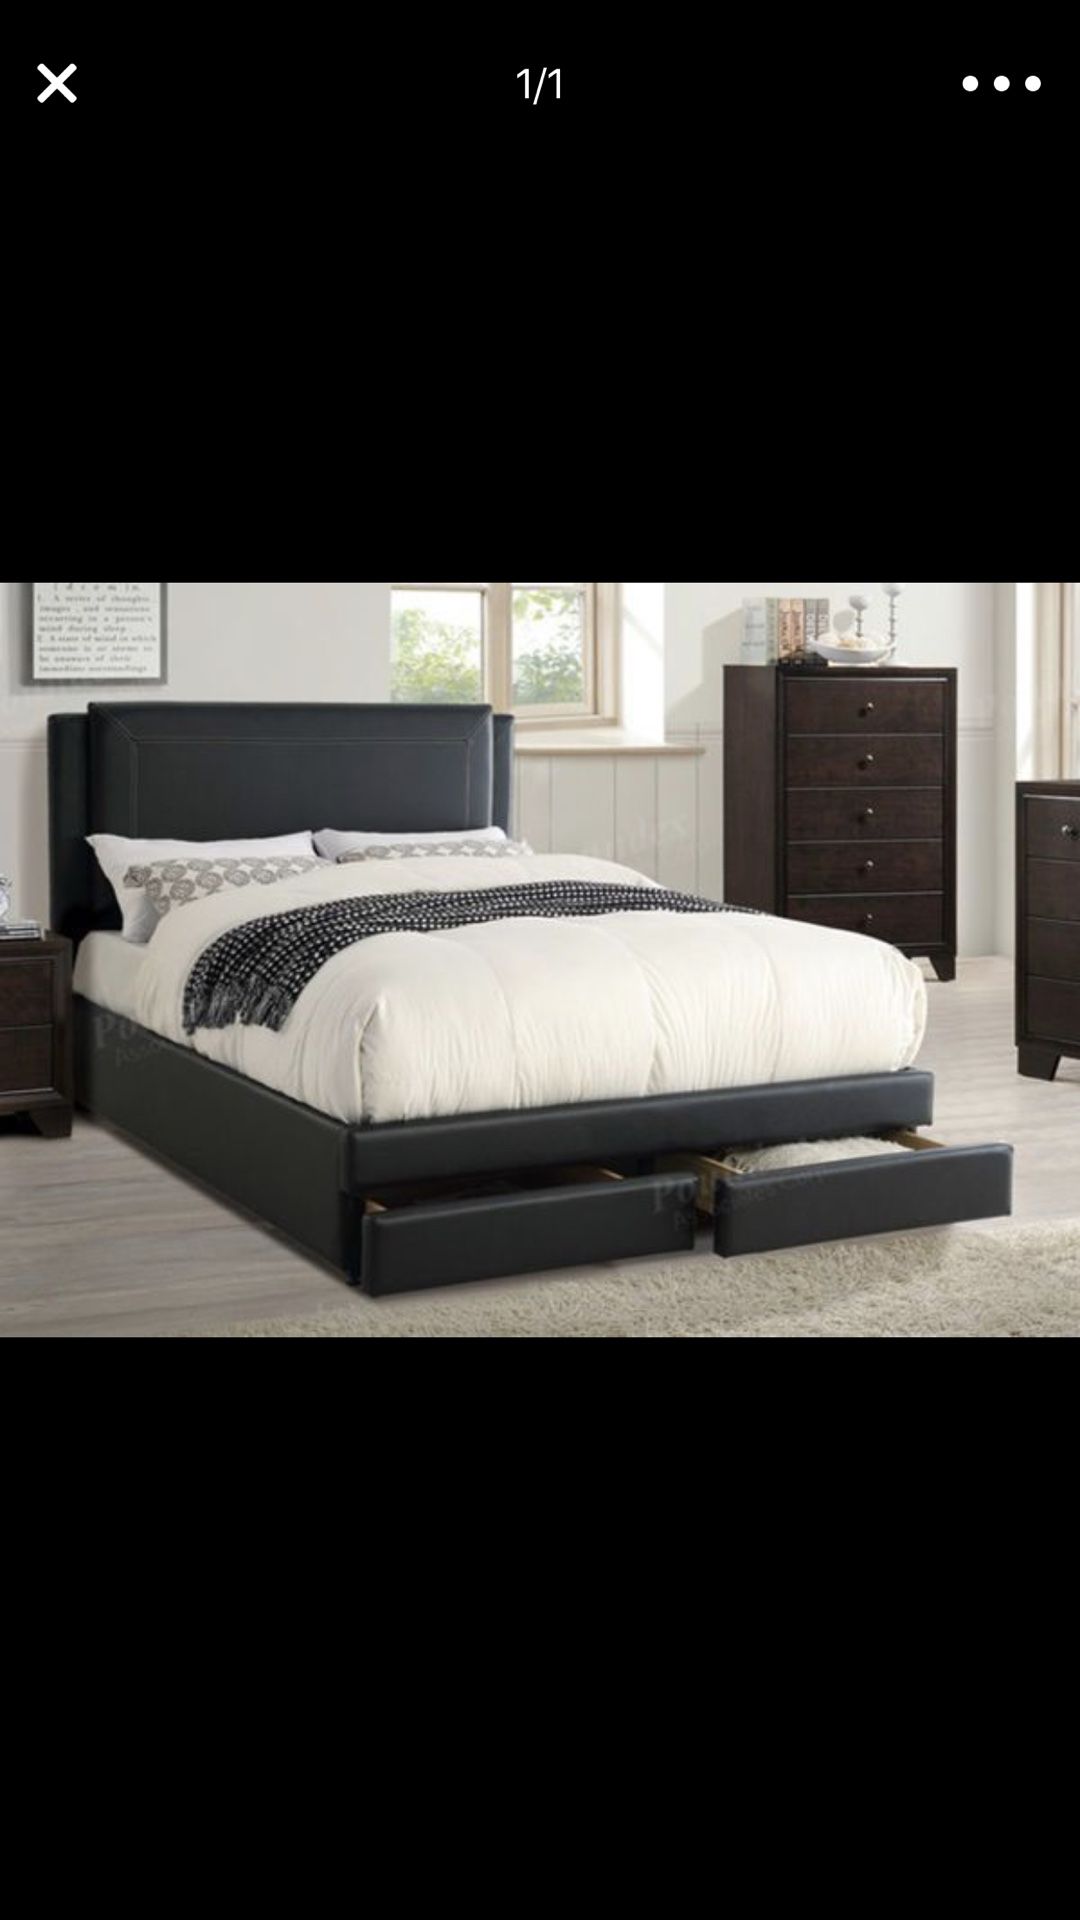 Storage Bed Black New in box. Next day Delivery available